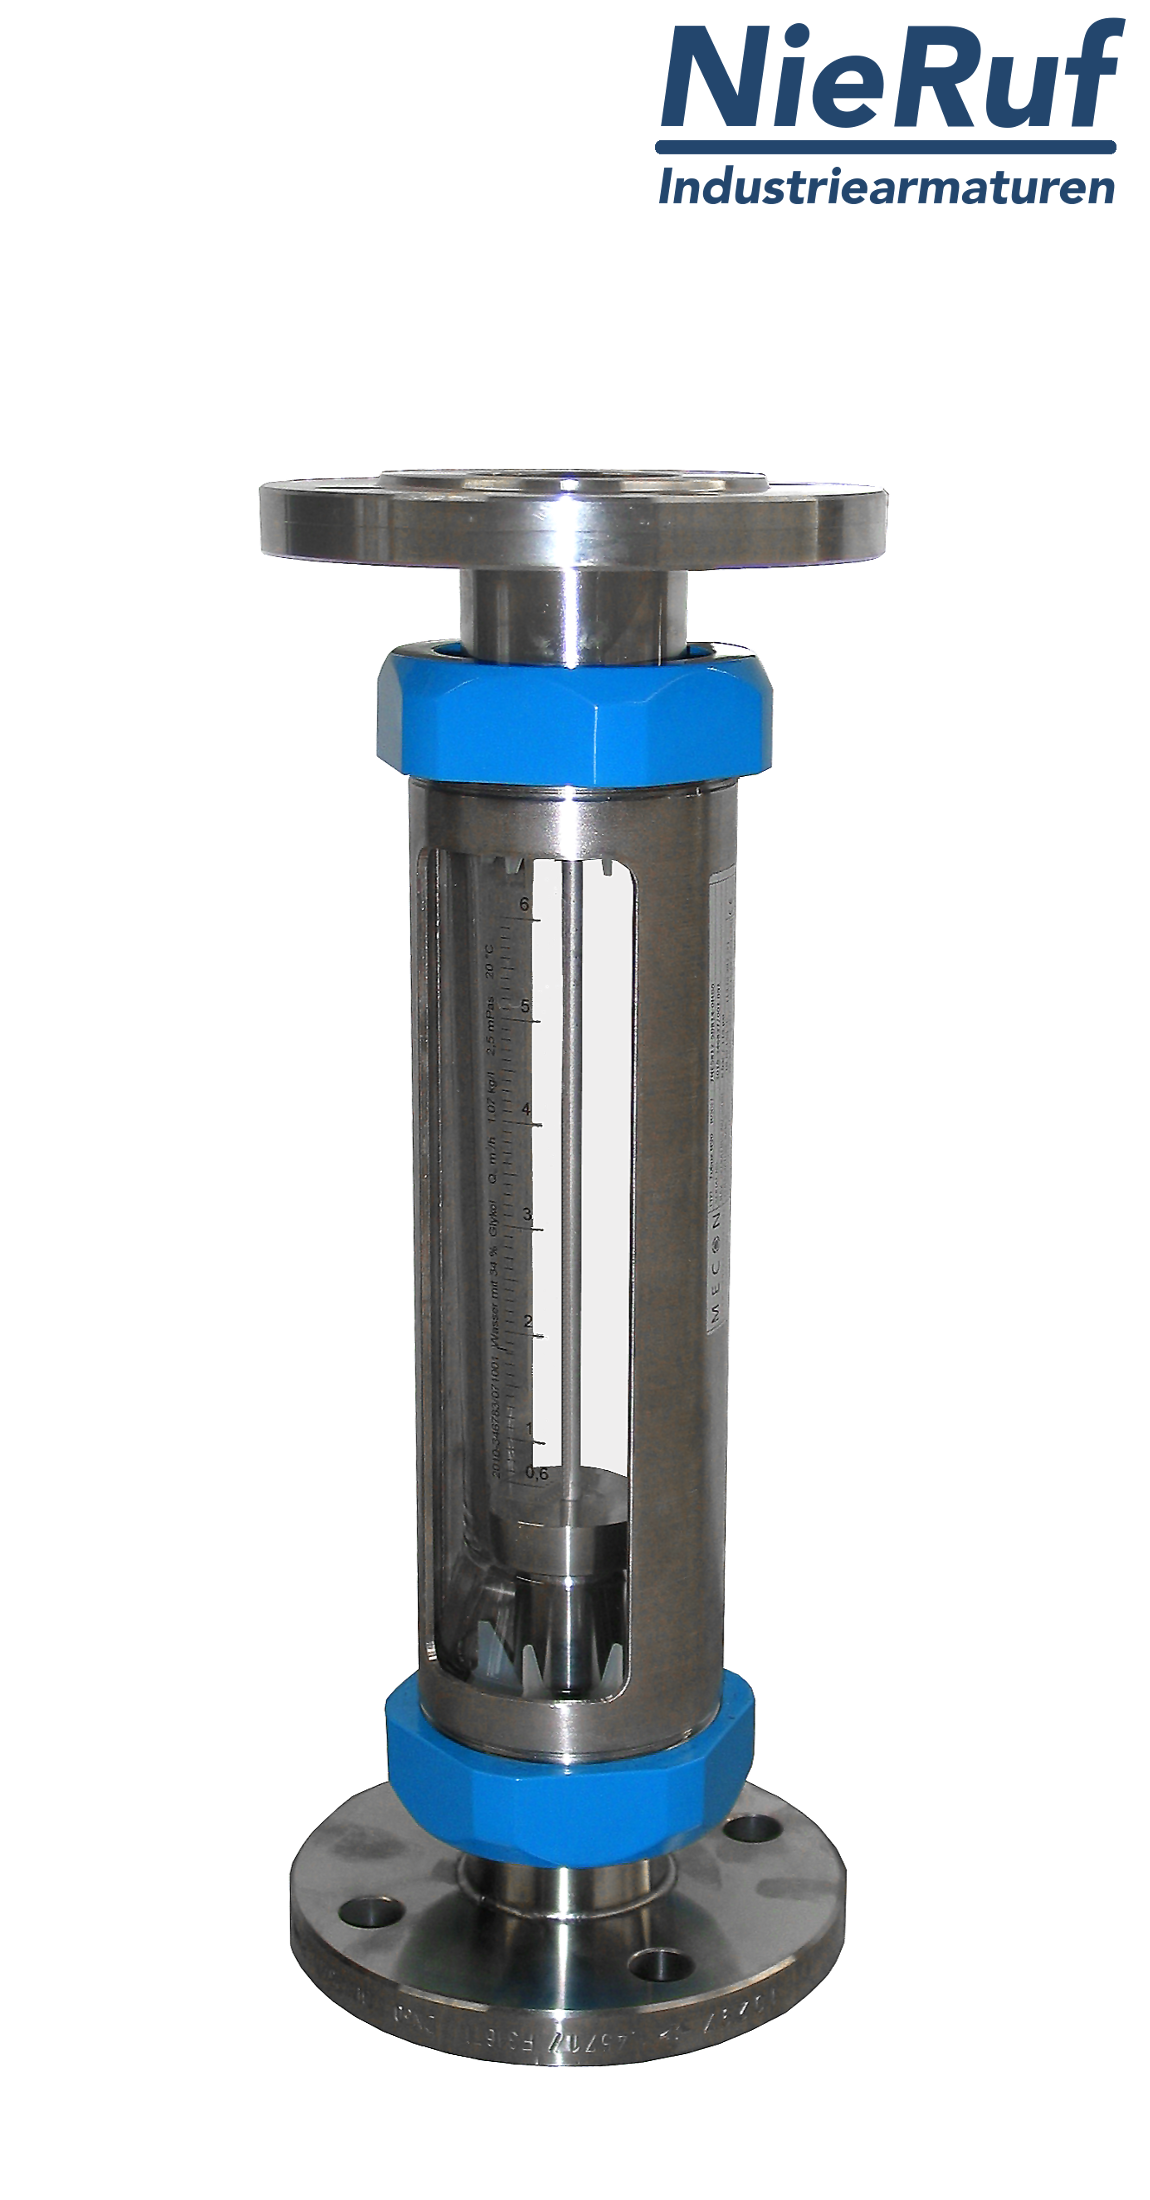 Variable area flowmeter stainless steel + borosilicate flange DN50 125.0 - 1250 l/h water FKM